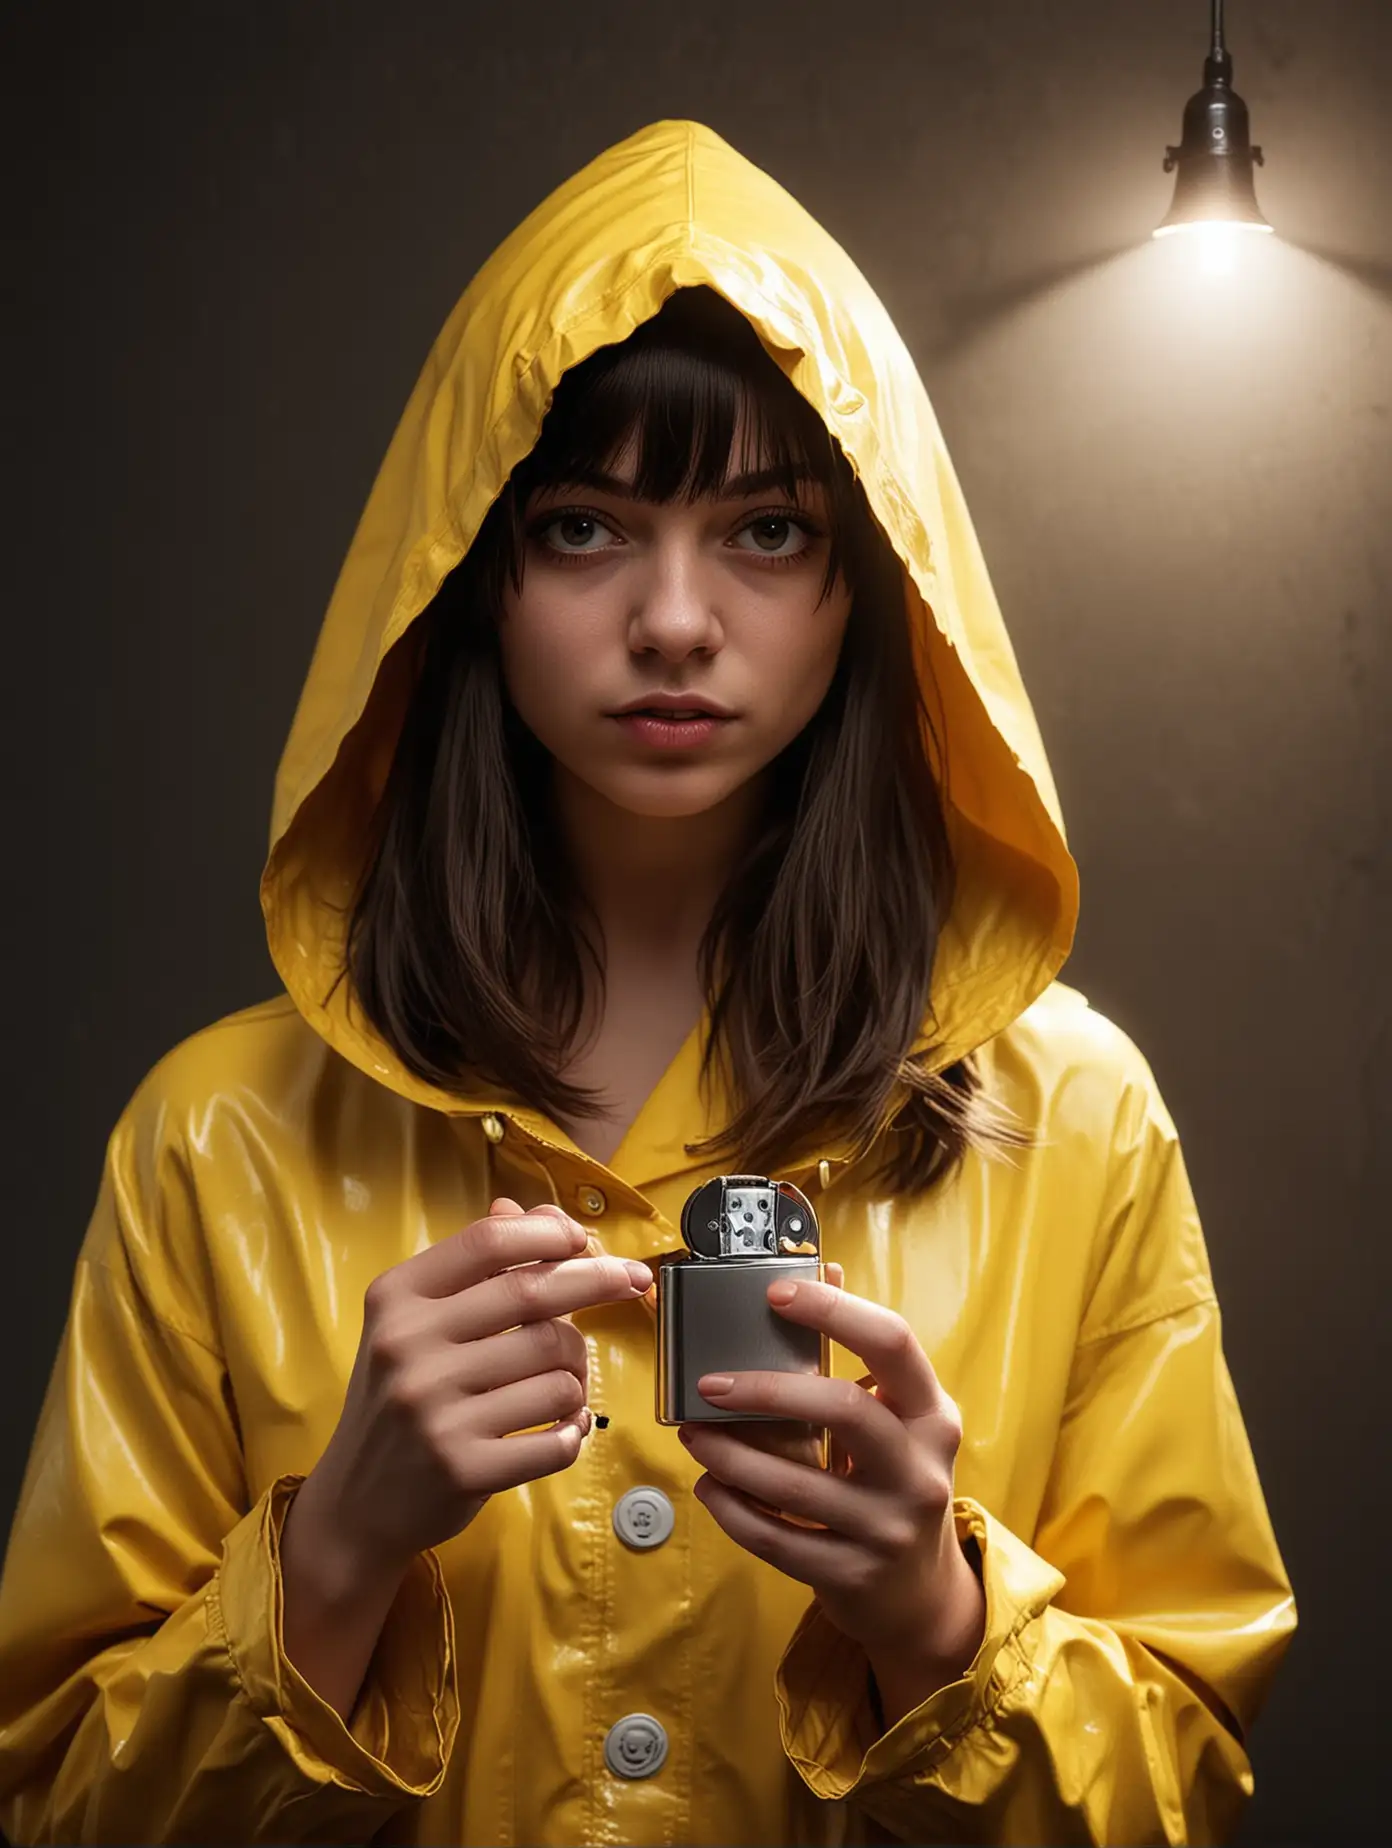 Teenage girl wearing yellow raincoat with hood pulled up, dark brown hair blunt cut with bangs, holding zippo lighter out in front of her, dramatic shadows and lighting, six from little nightmares inspired